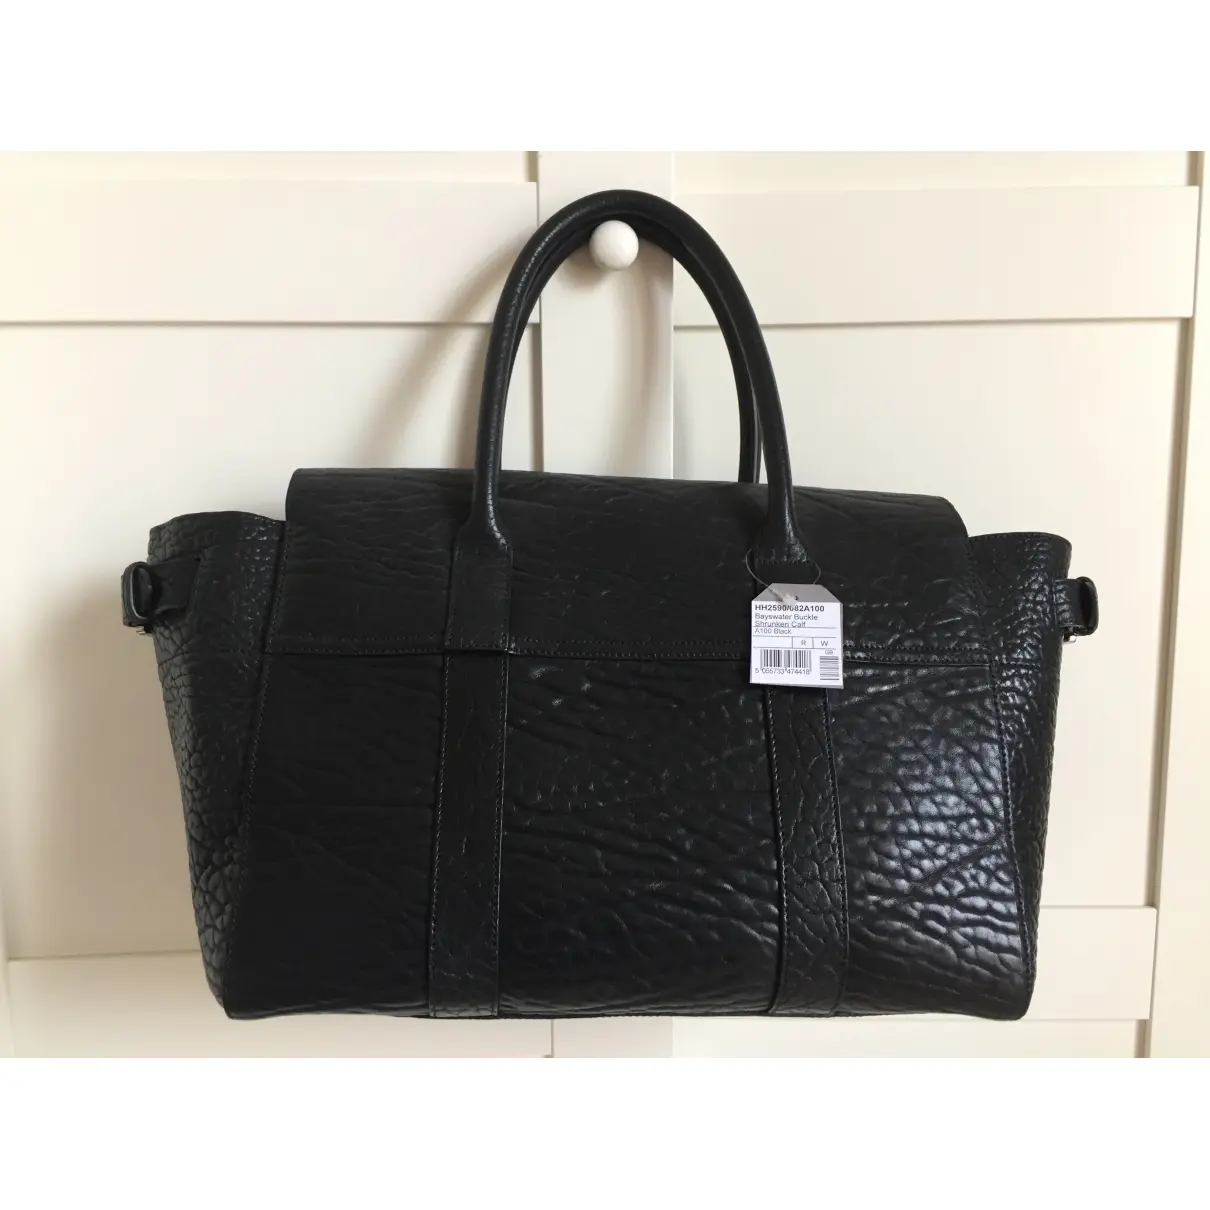 Mulberry Bayswater leather handbag for sale